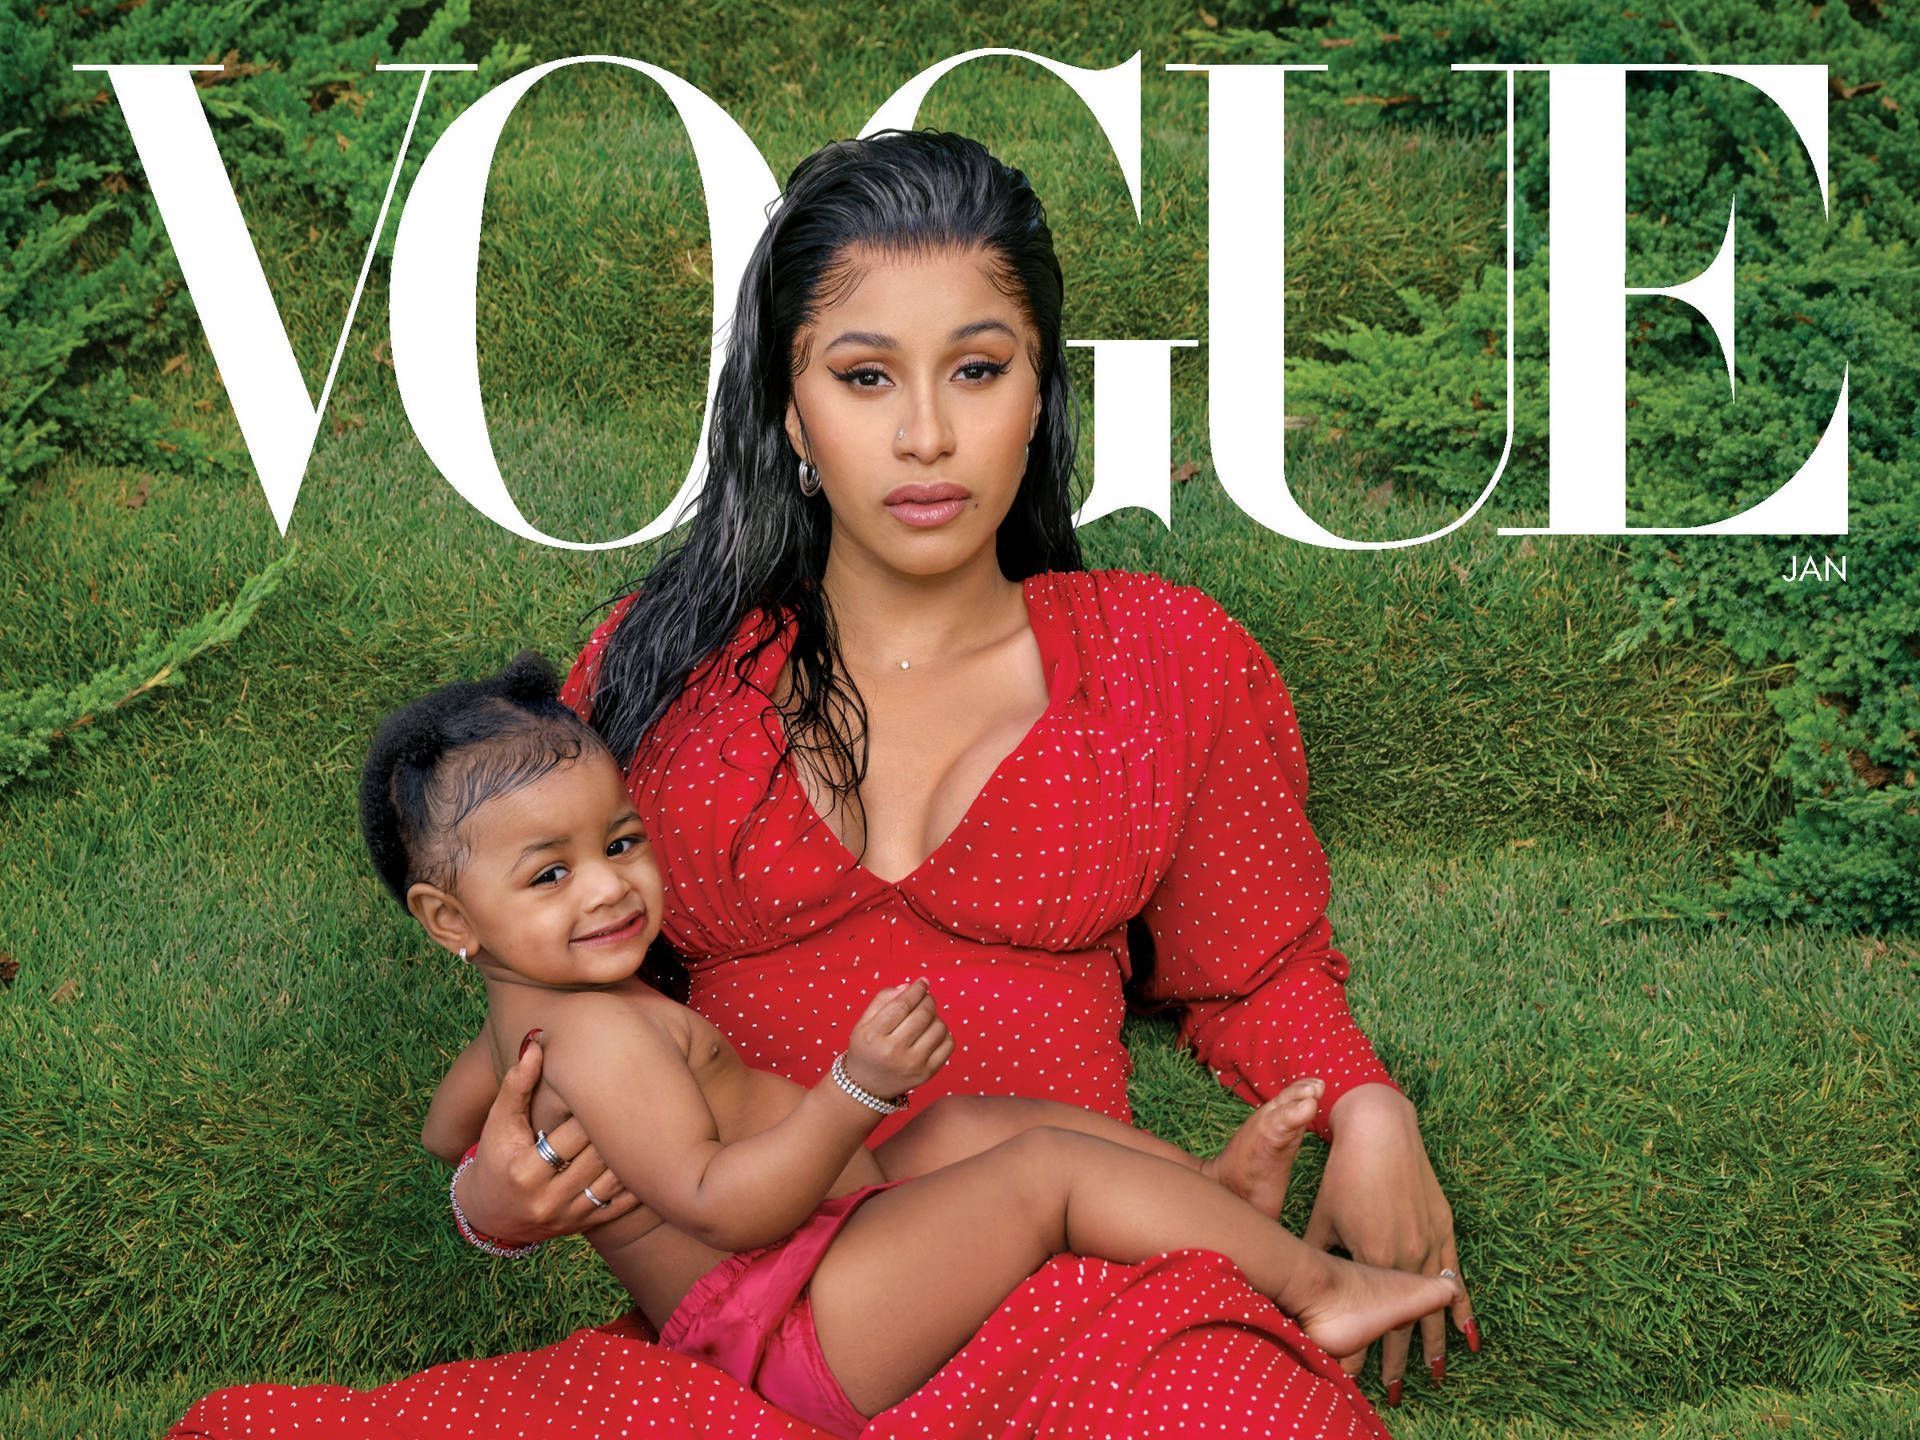 Cardi B and her daughter Kulture on the cover of Vogue - Cardi B